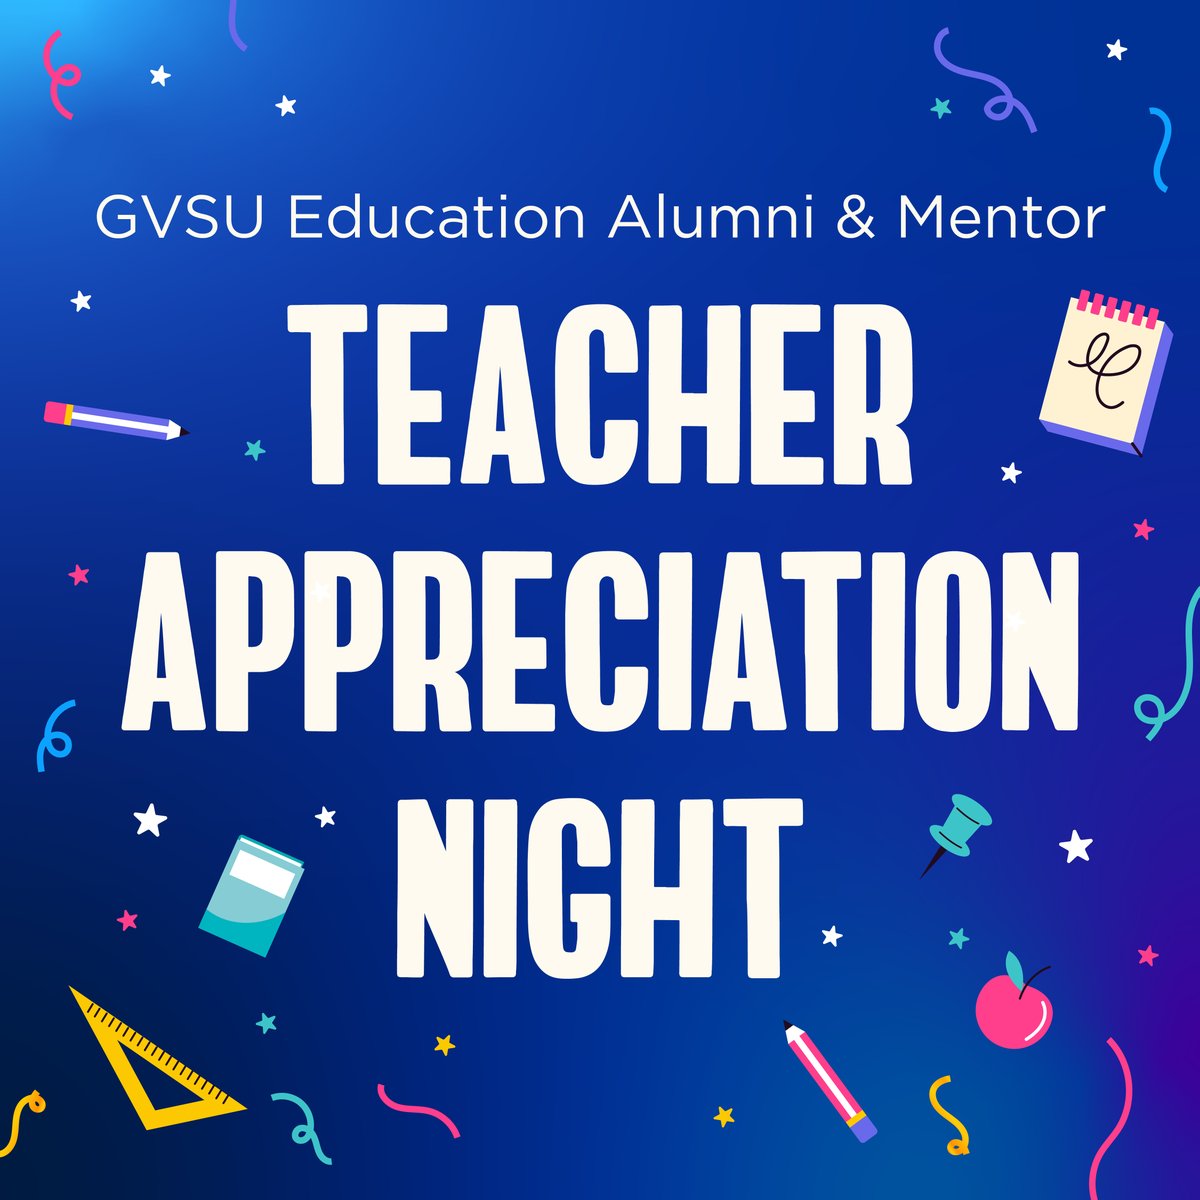 Join us on May 6 for GVSU Education Alumni & Teacher Appreciation Night! We're celebrating all #GVSU mentors and alumni teachers, and welcoming our newest grads into the Alumni Network! Enjoy heavy appetizers and two drink tickets! 🏫 RSVP by April 23 at gvsu.edu/s/2Gf